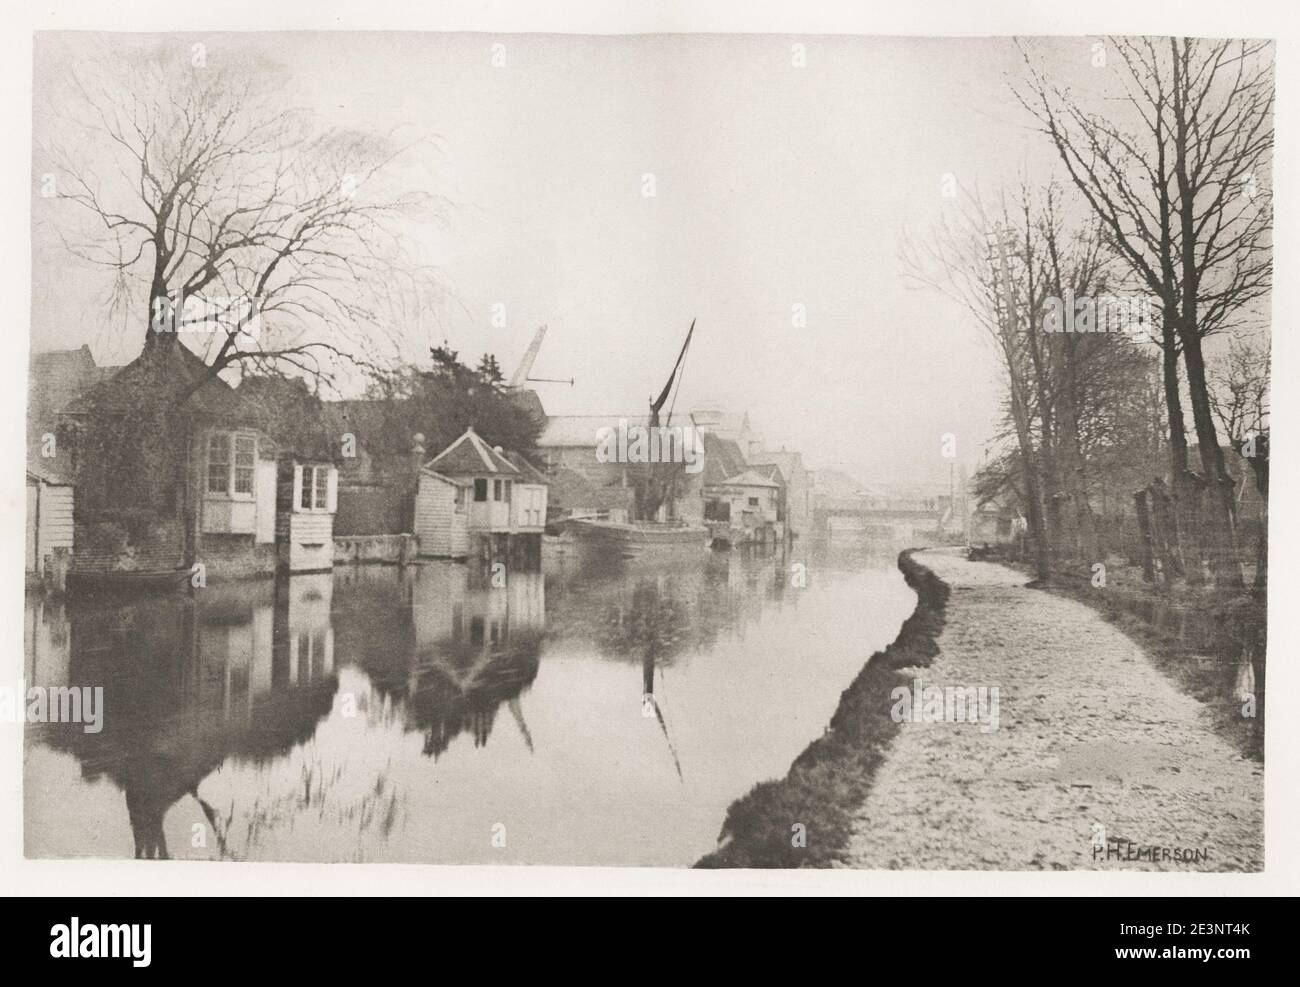 Vintage 19th century/1900's photograph by Peter Henry Emerson. Emerson was a British writer and photographer. His photographs are early examples of promoting straight photography as an art form. He is known for taking photographs that displayed rural settings and for his disputes with the photographic establishment about the purpose and meaning of photography. River bank scene, Norfolk? Stock Photo